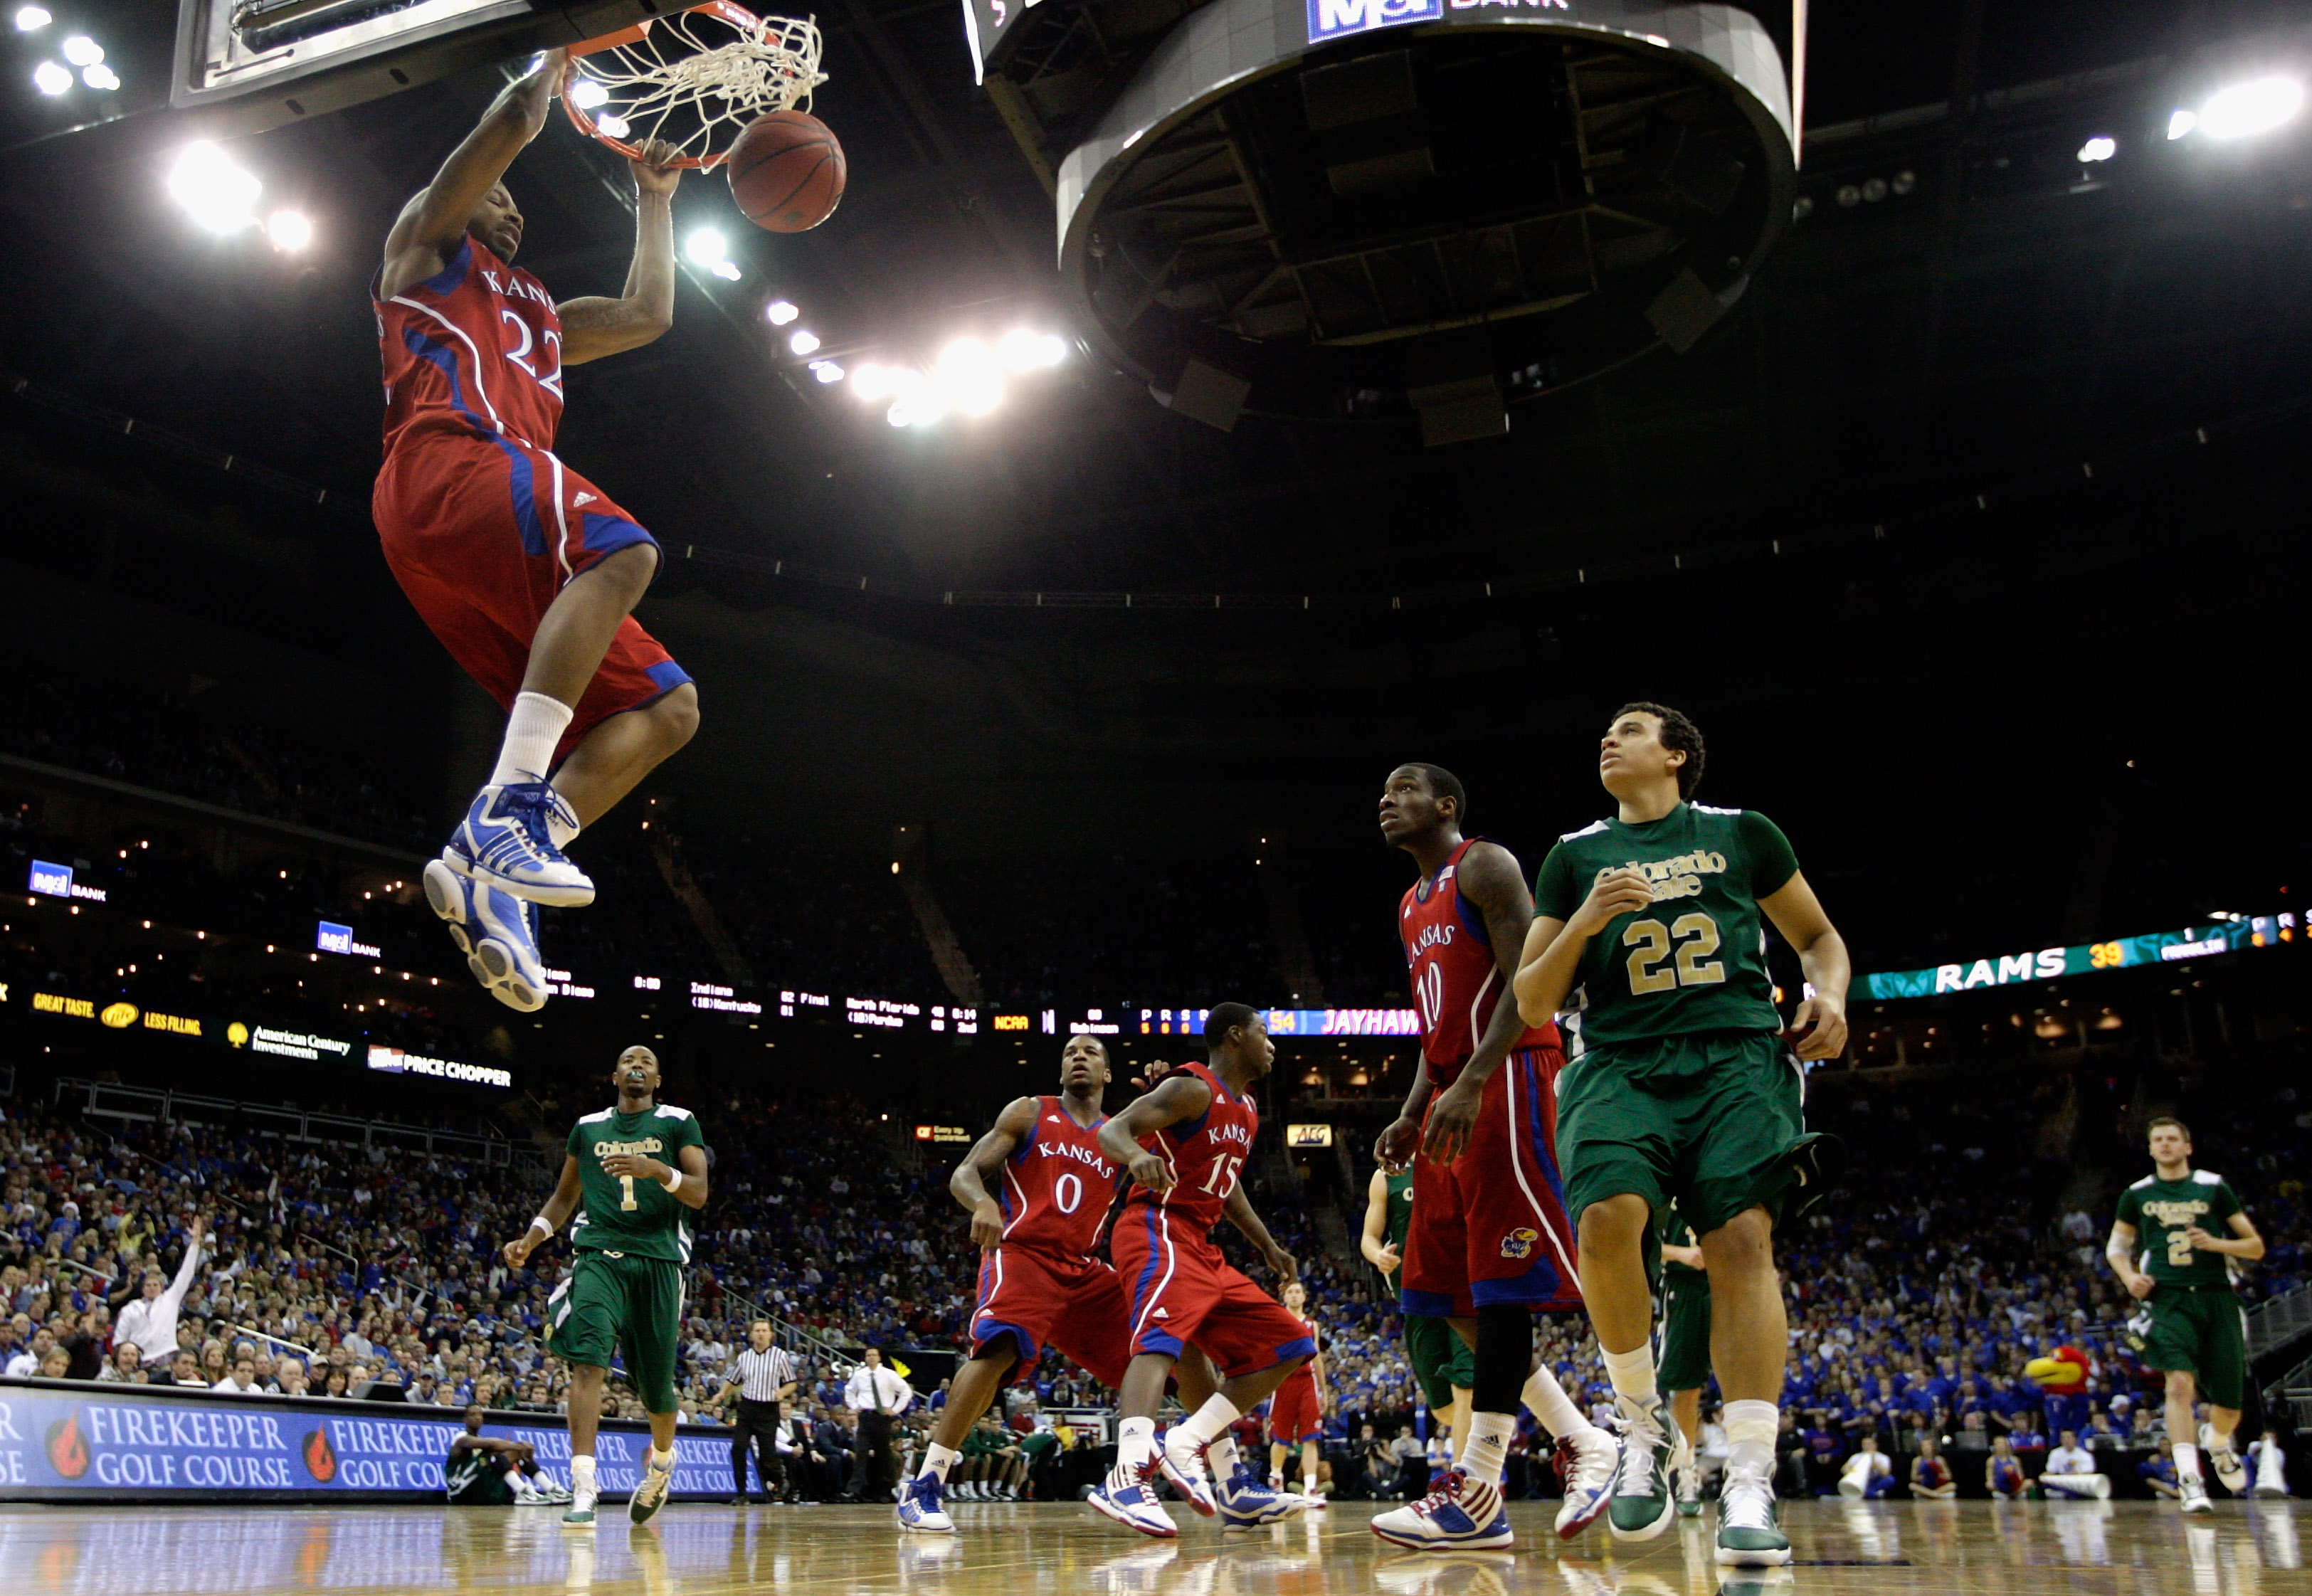 KANSAS CITY, MO - DECEMBER 11:  Marcus Morris #22 of the Kansas Jayhawks dunks on a fast break during the game against the Colorado State Rams on December 11, 2010 at the Sprint Center in Kansas City, Missouri.  (Photo by Jamie Squire/Getty Images)